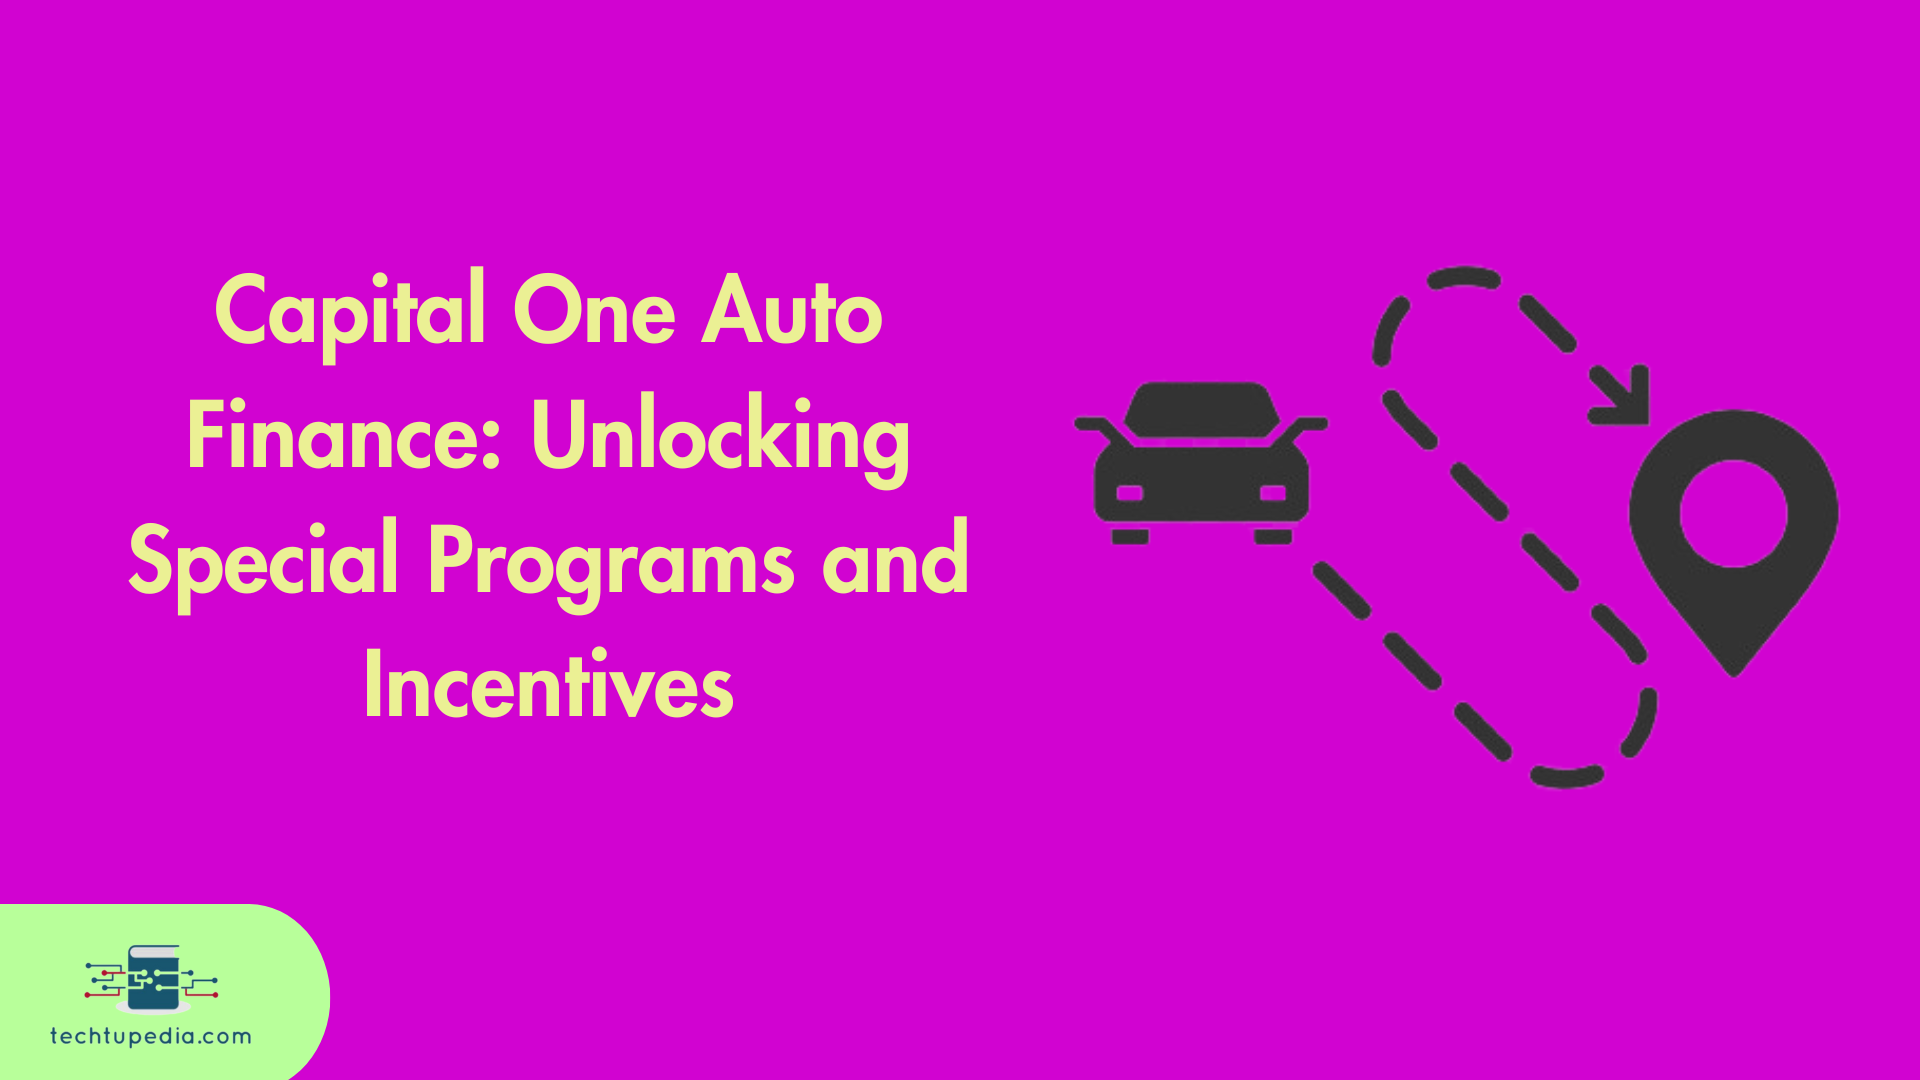 Capital One Auto Finance: Unlocking Special Programs and Incentives